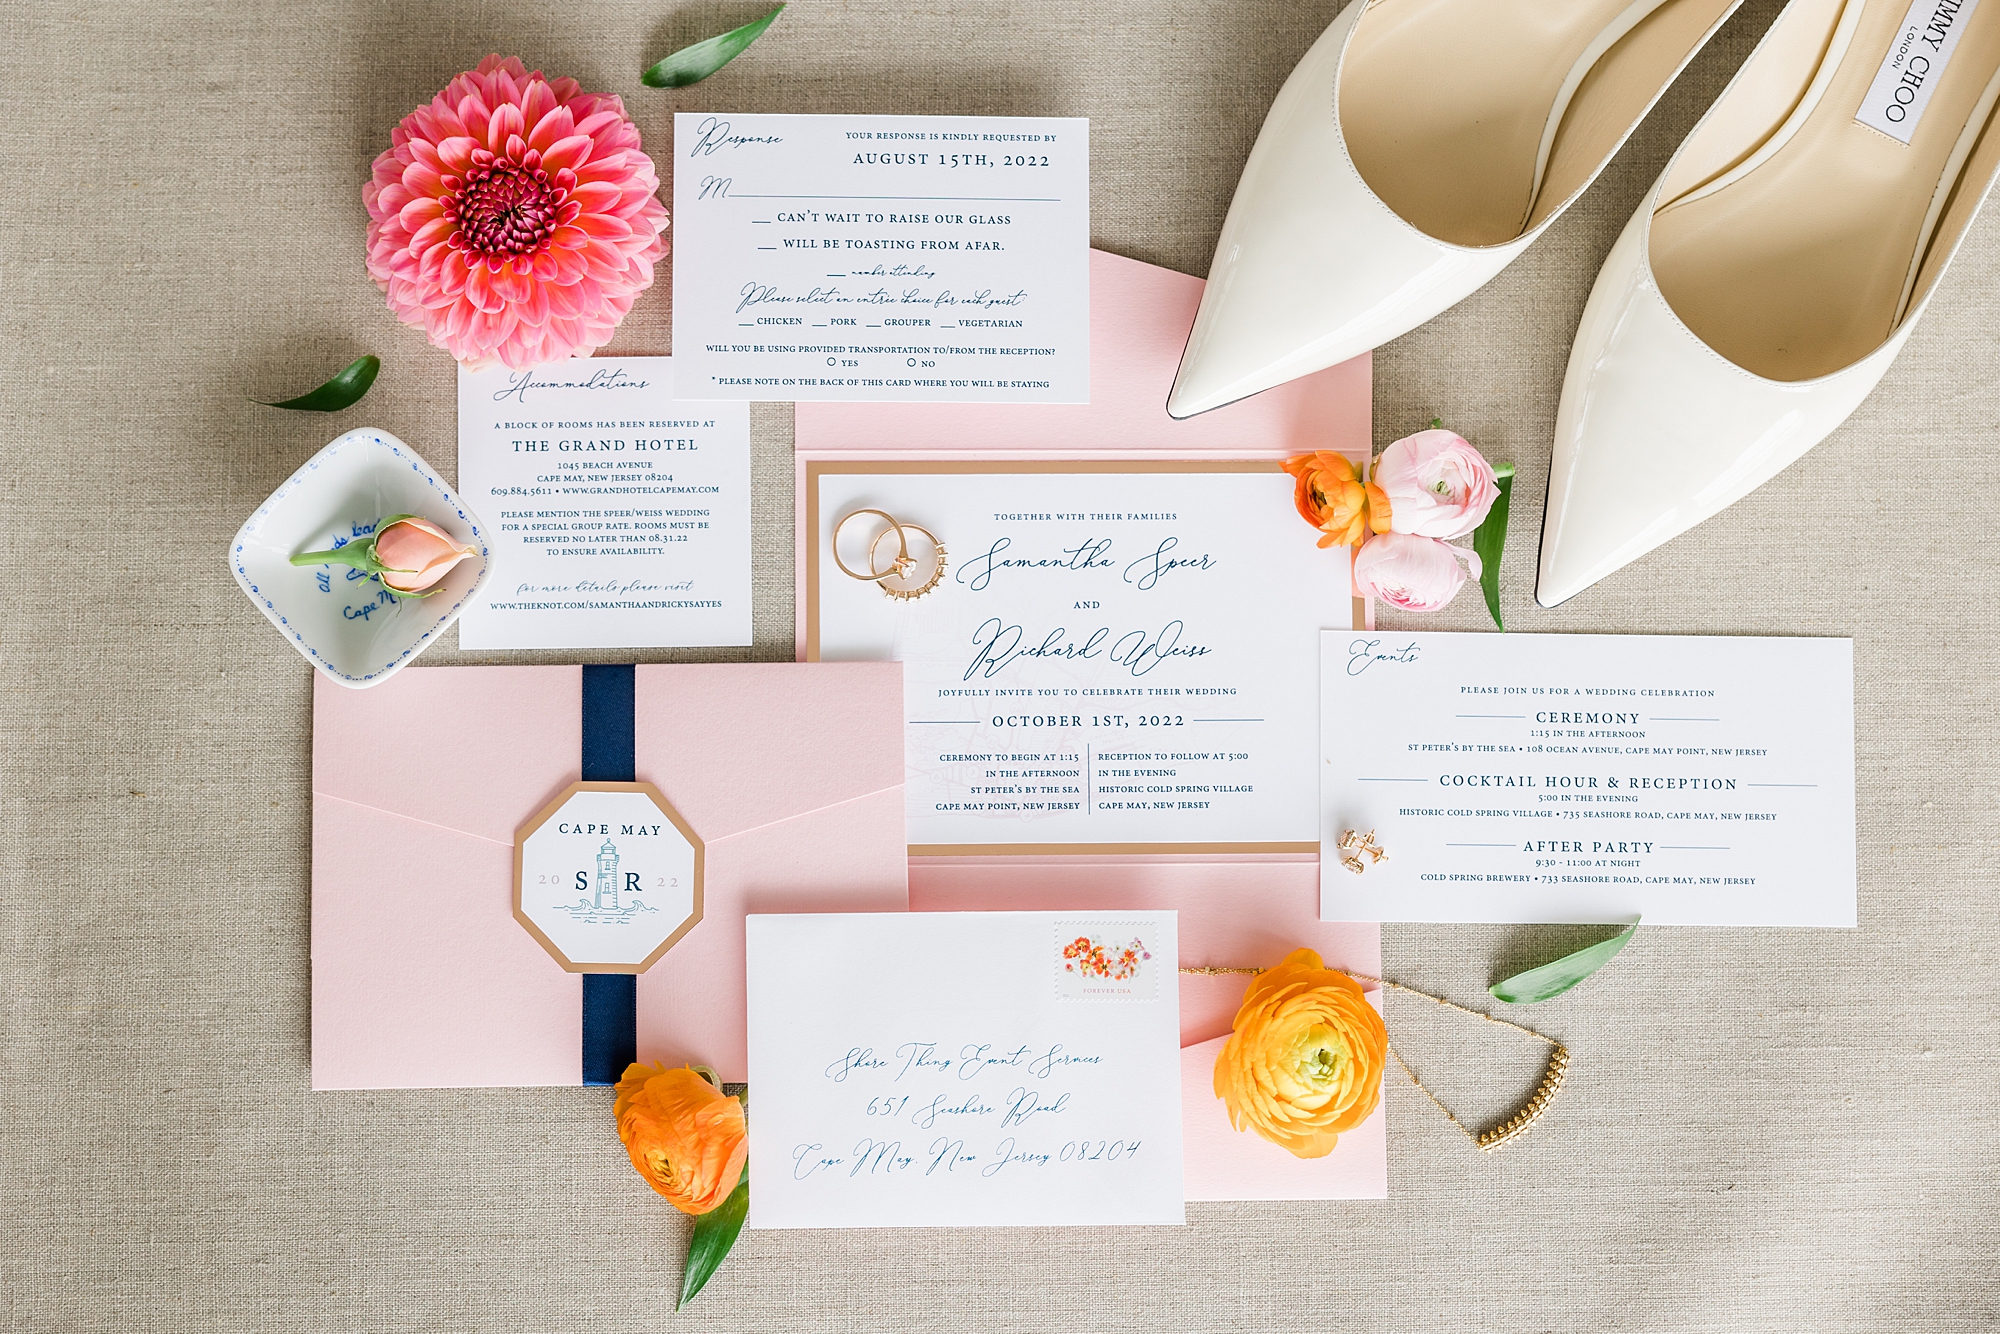 Intimate Cape May Wedding Details